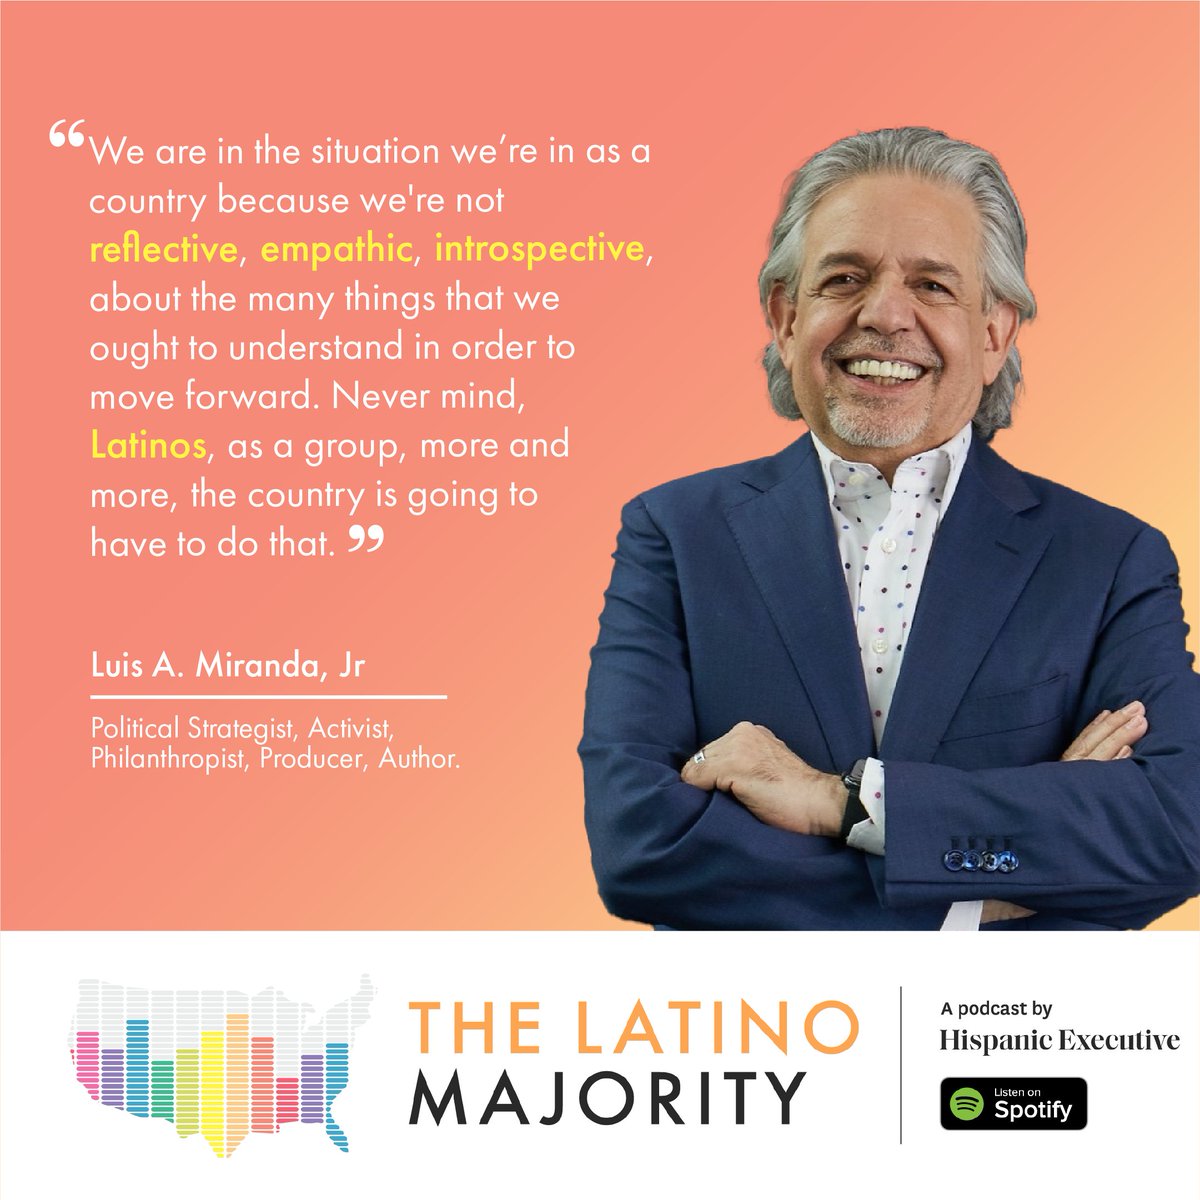 🎙️ EPISODE TEASER: Join us for a new episode of The Latino Majority podcast featuring the remarkable Luis Miranda, Jr. Tune in this Wednesday, May 8th! hubs.la/Q02wf6x10 #TheLatinoMajority #Season6 #Podcast @Vegalteno